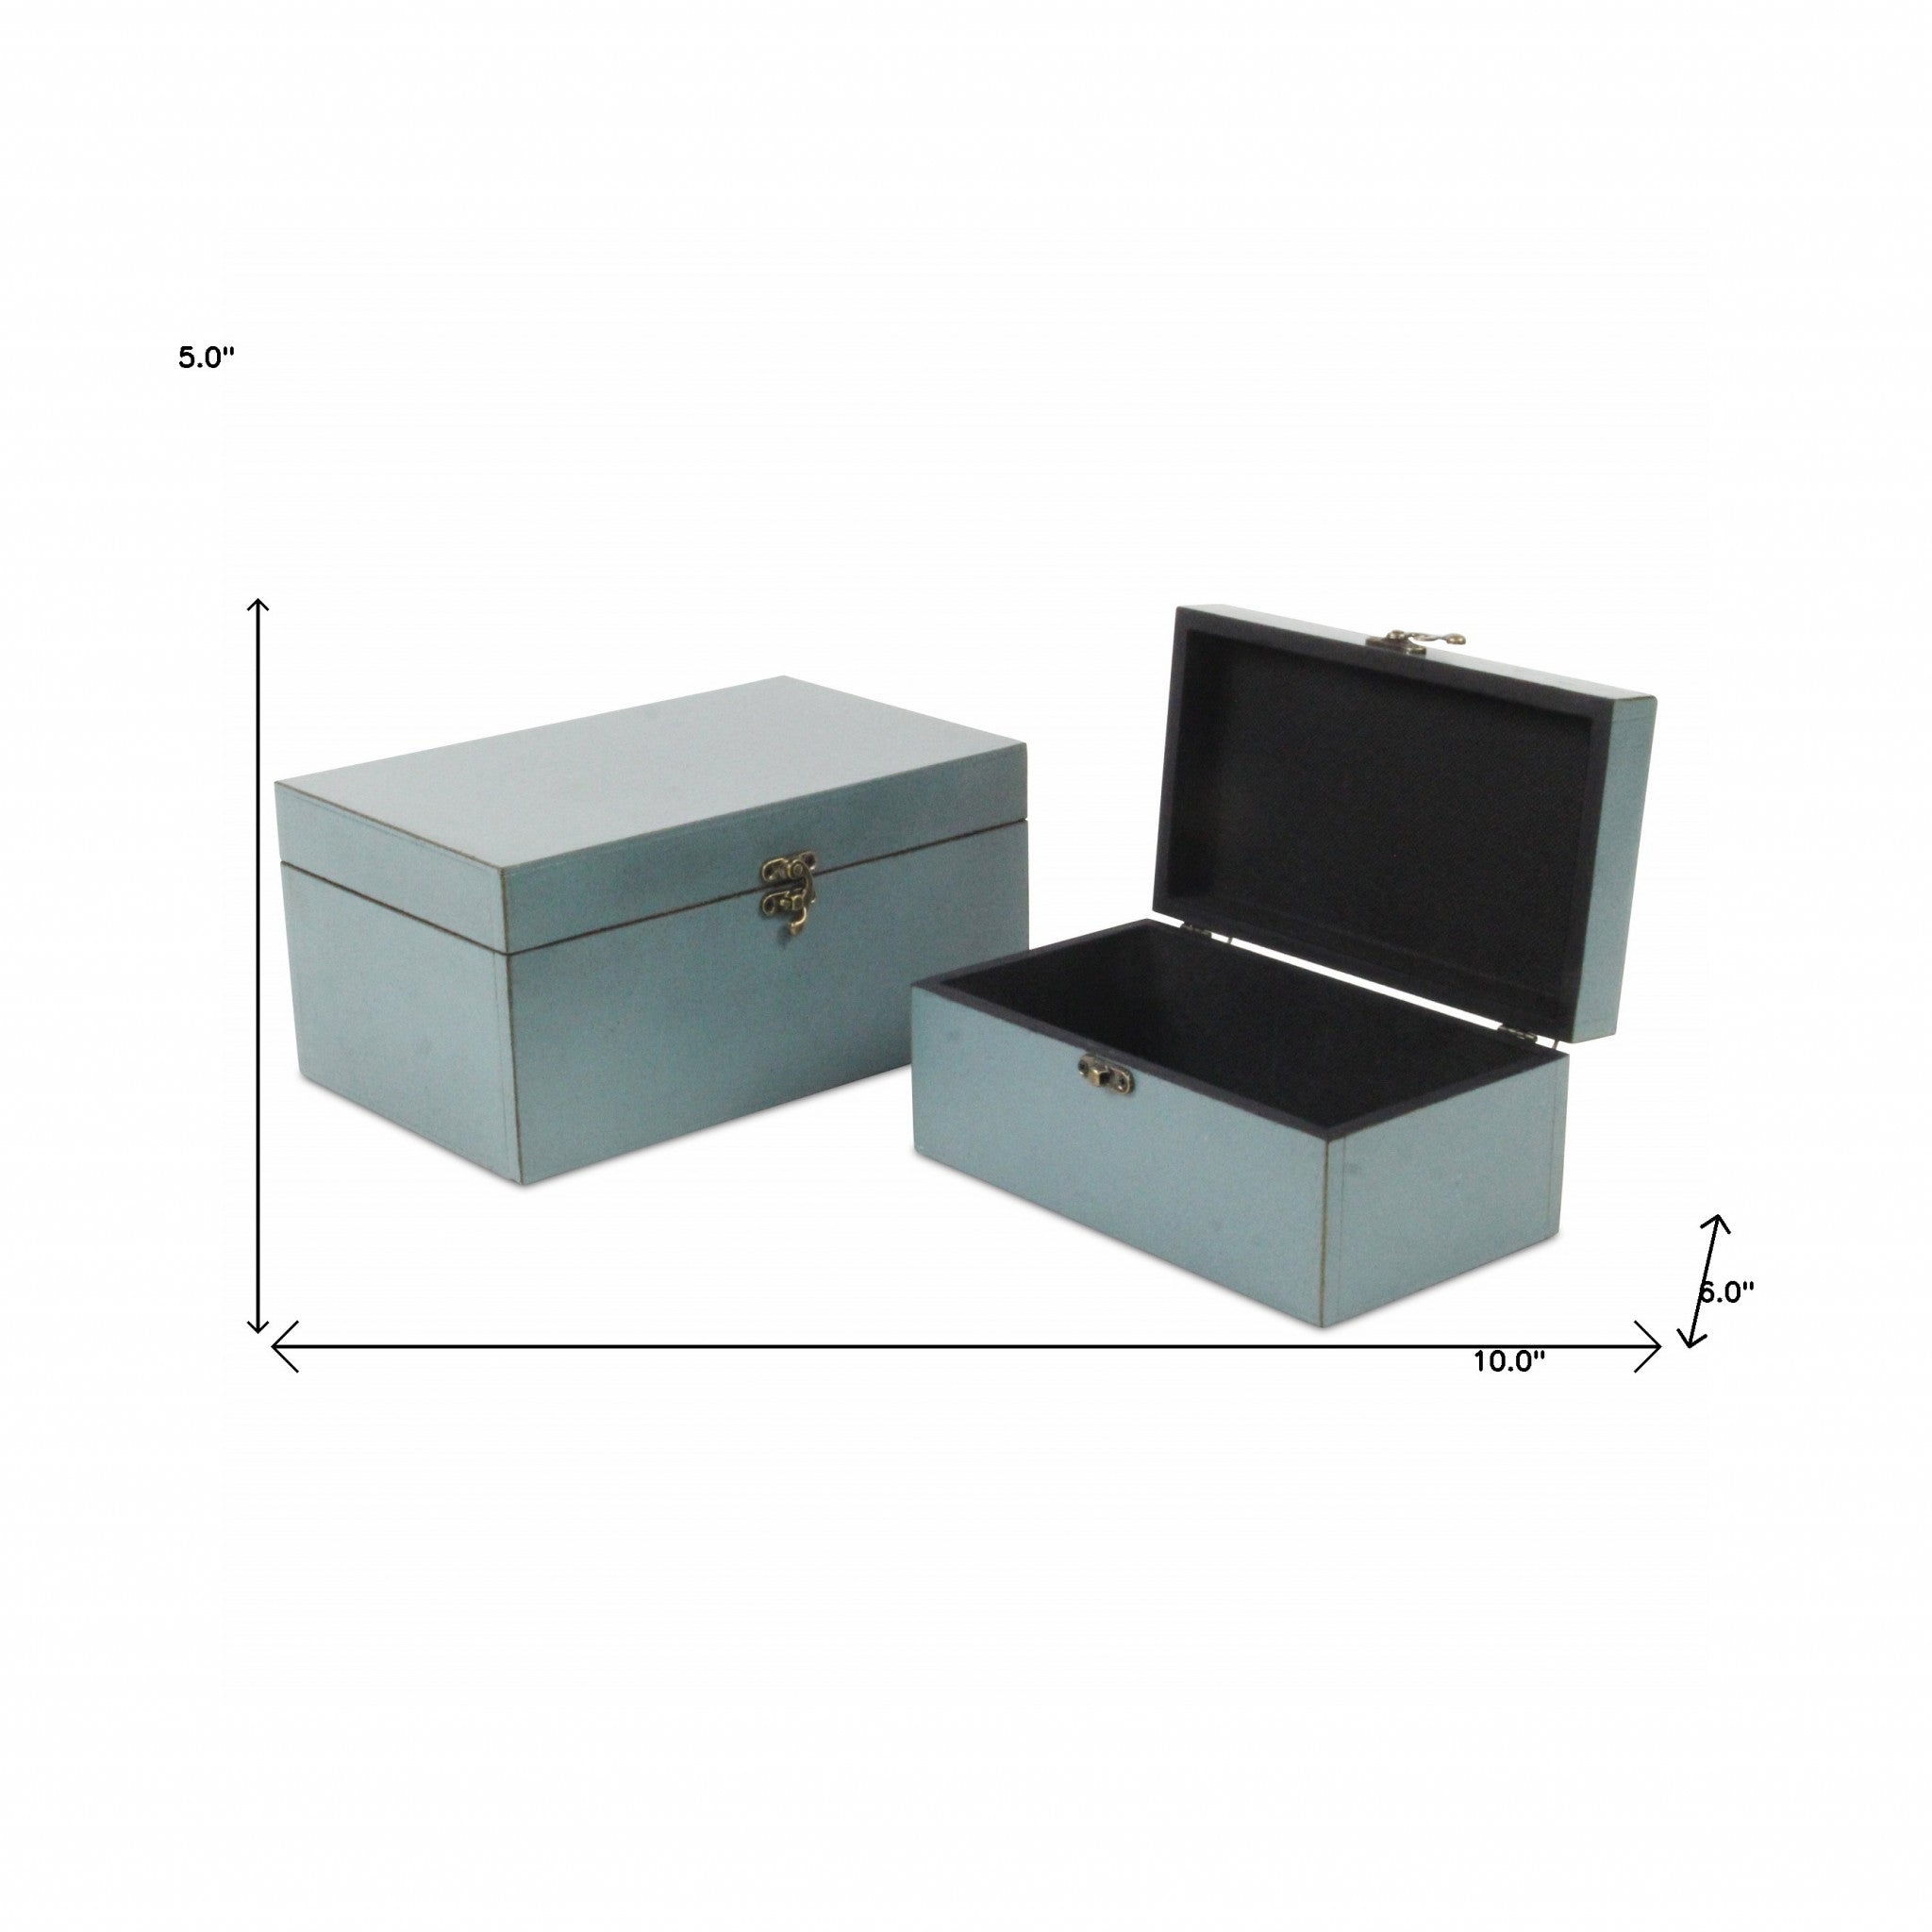 Set of Two Pale Blue Wooden Storage Boxes